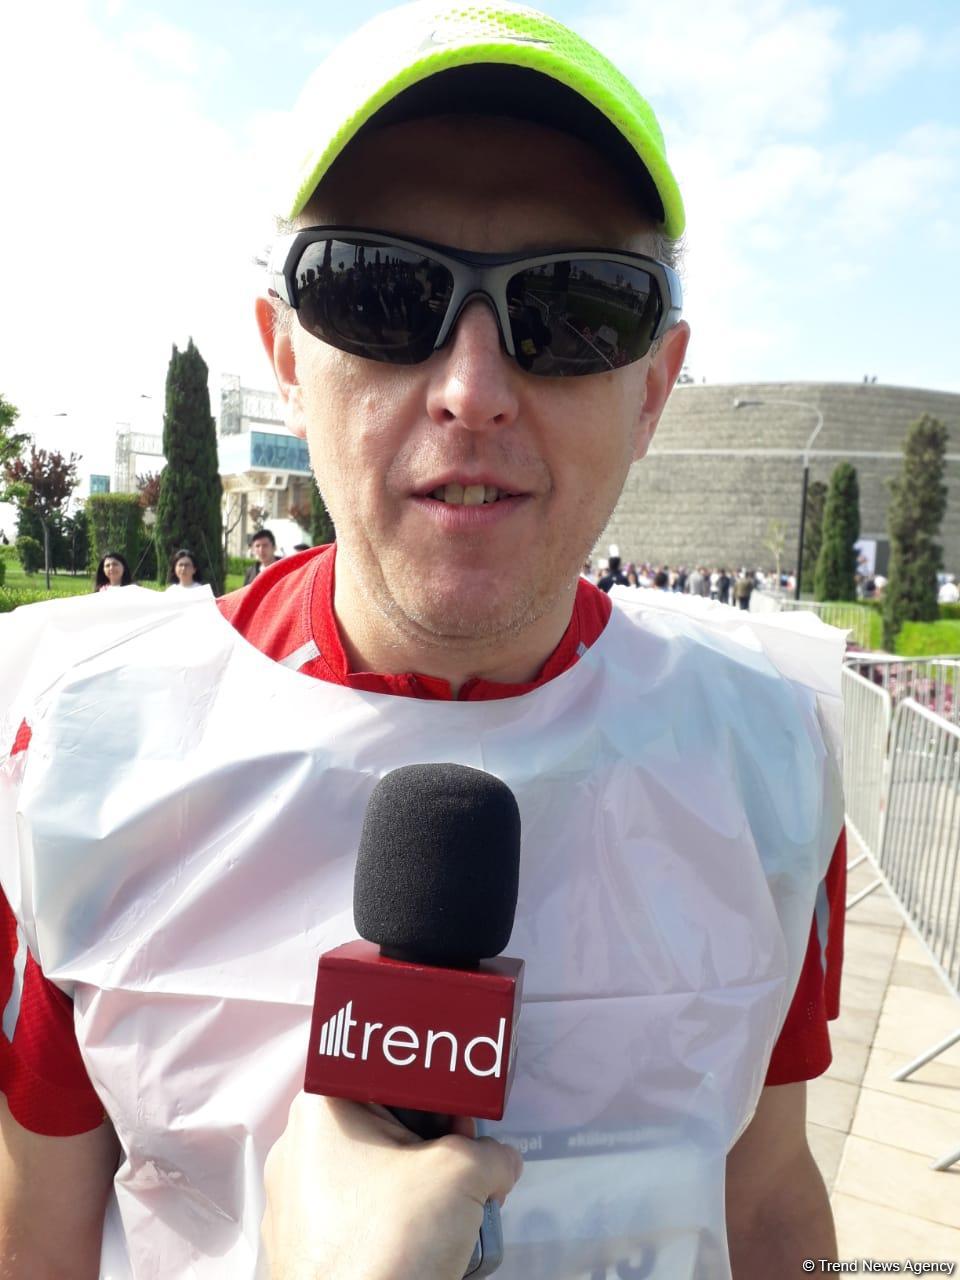 Polish guest: I arrived in Baku to participate namely in this marathon